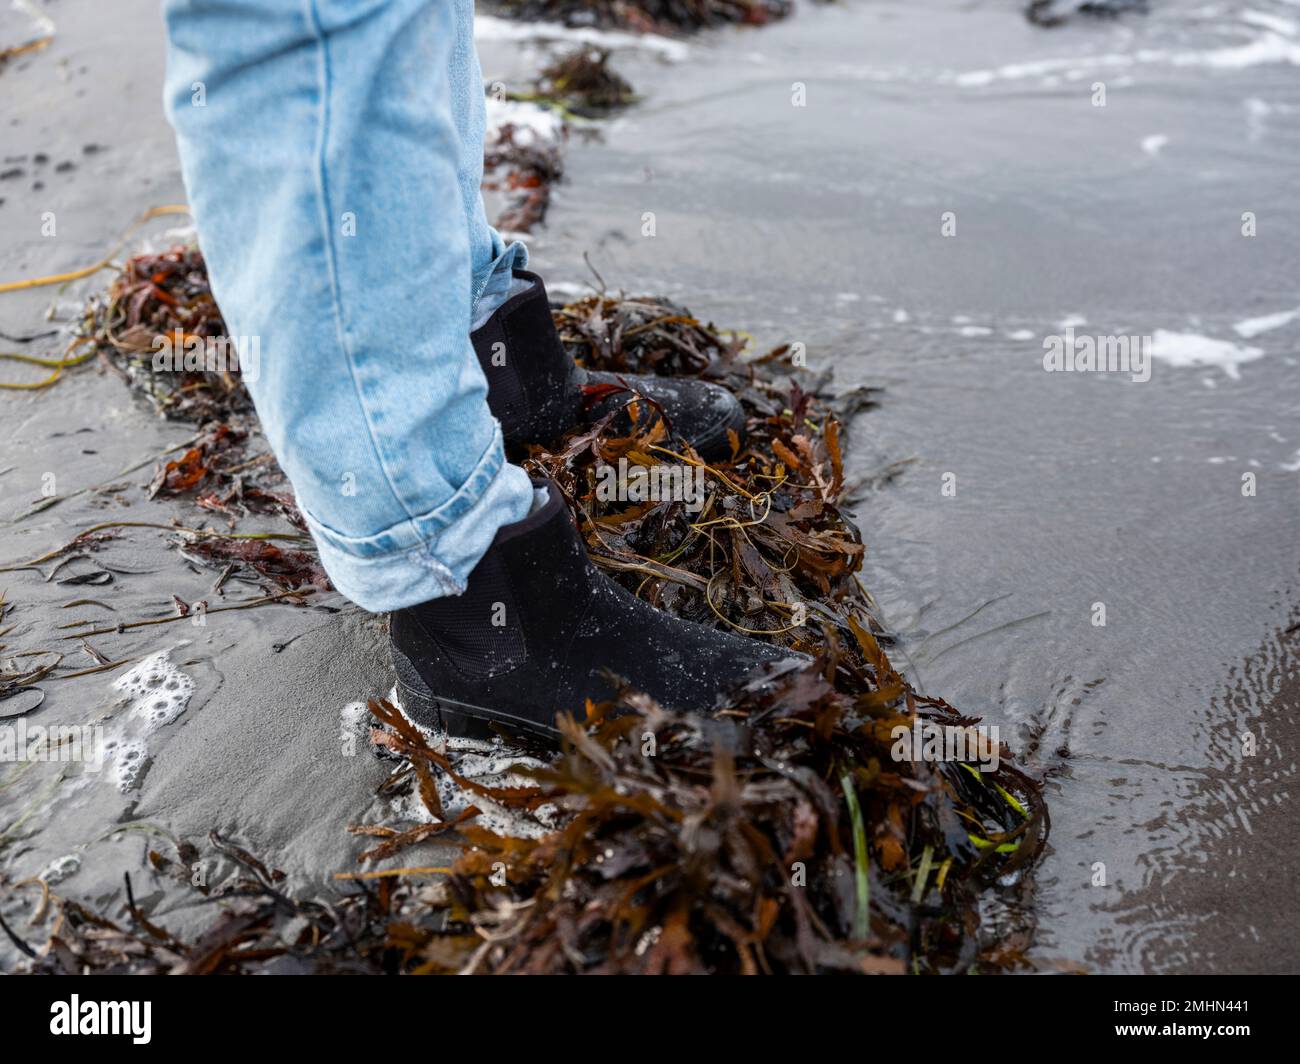 Person standing on seaweeds Stock Photo